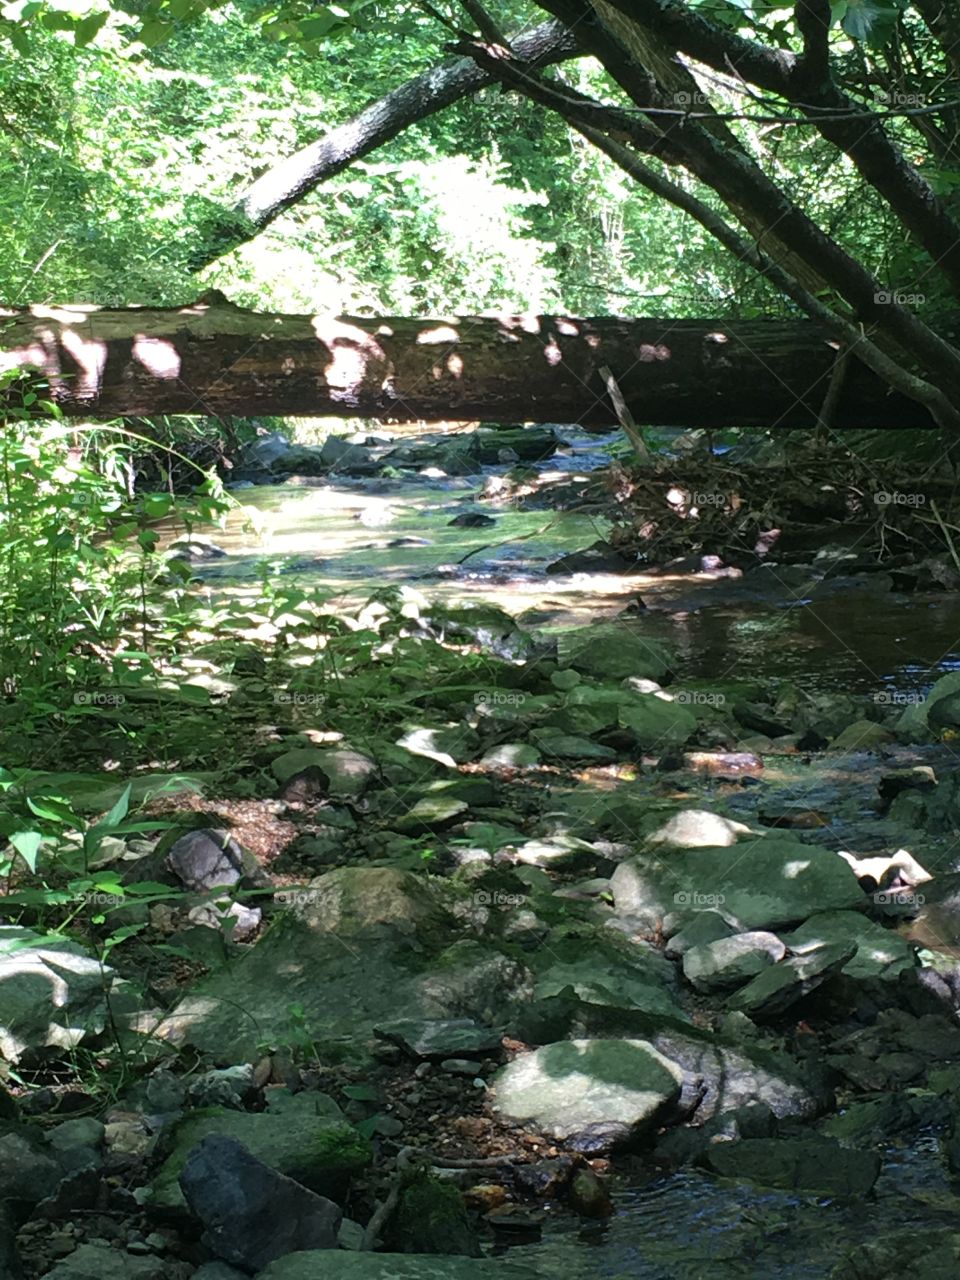 A peaceful creek in a forest